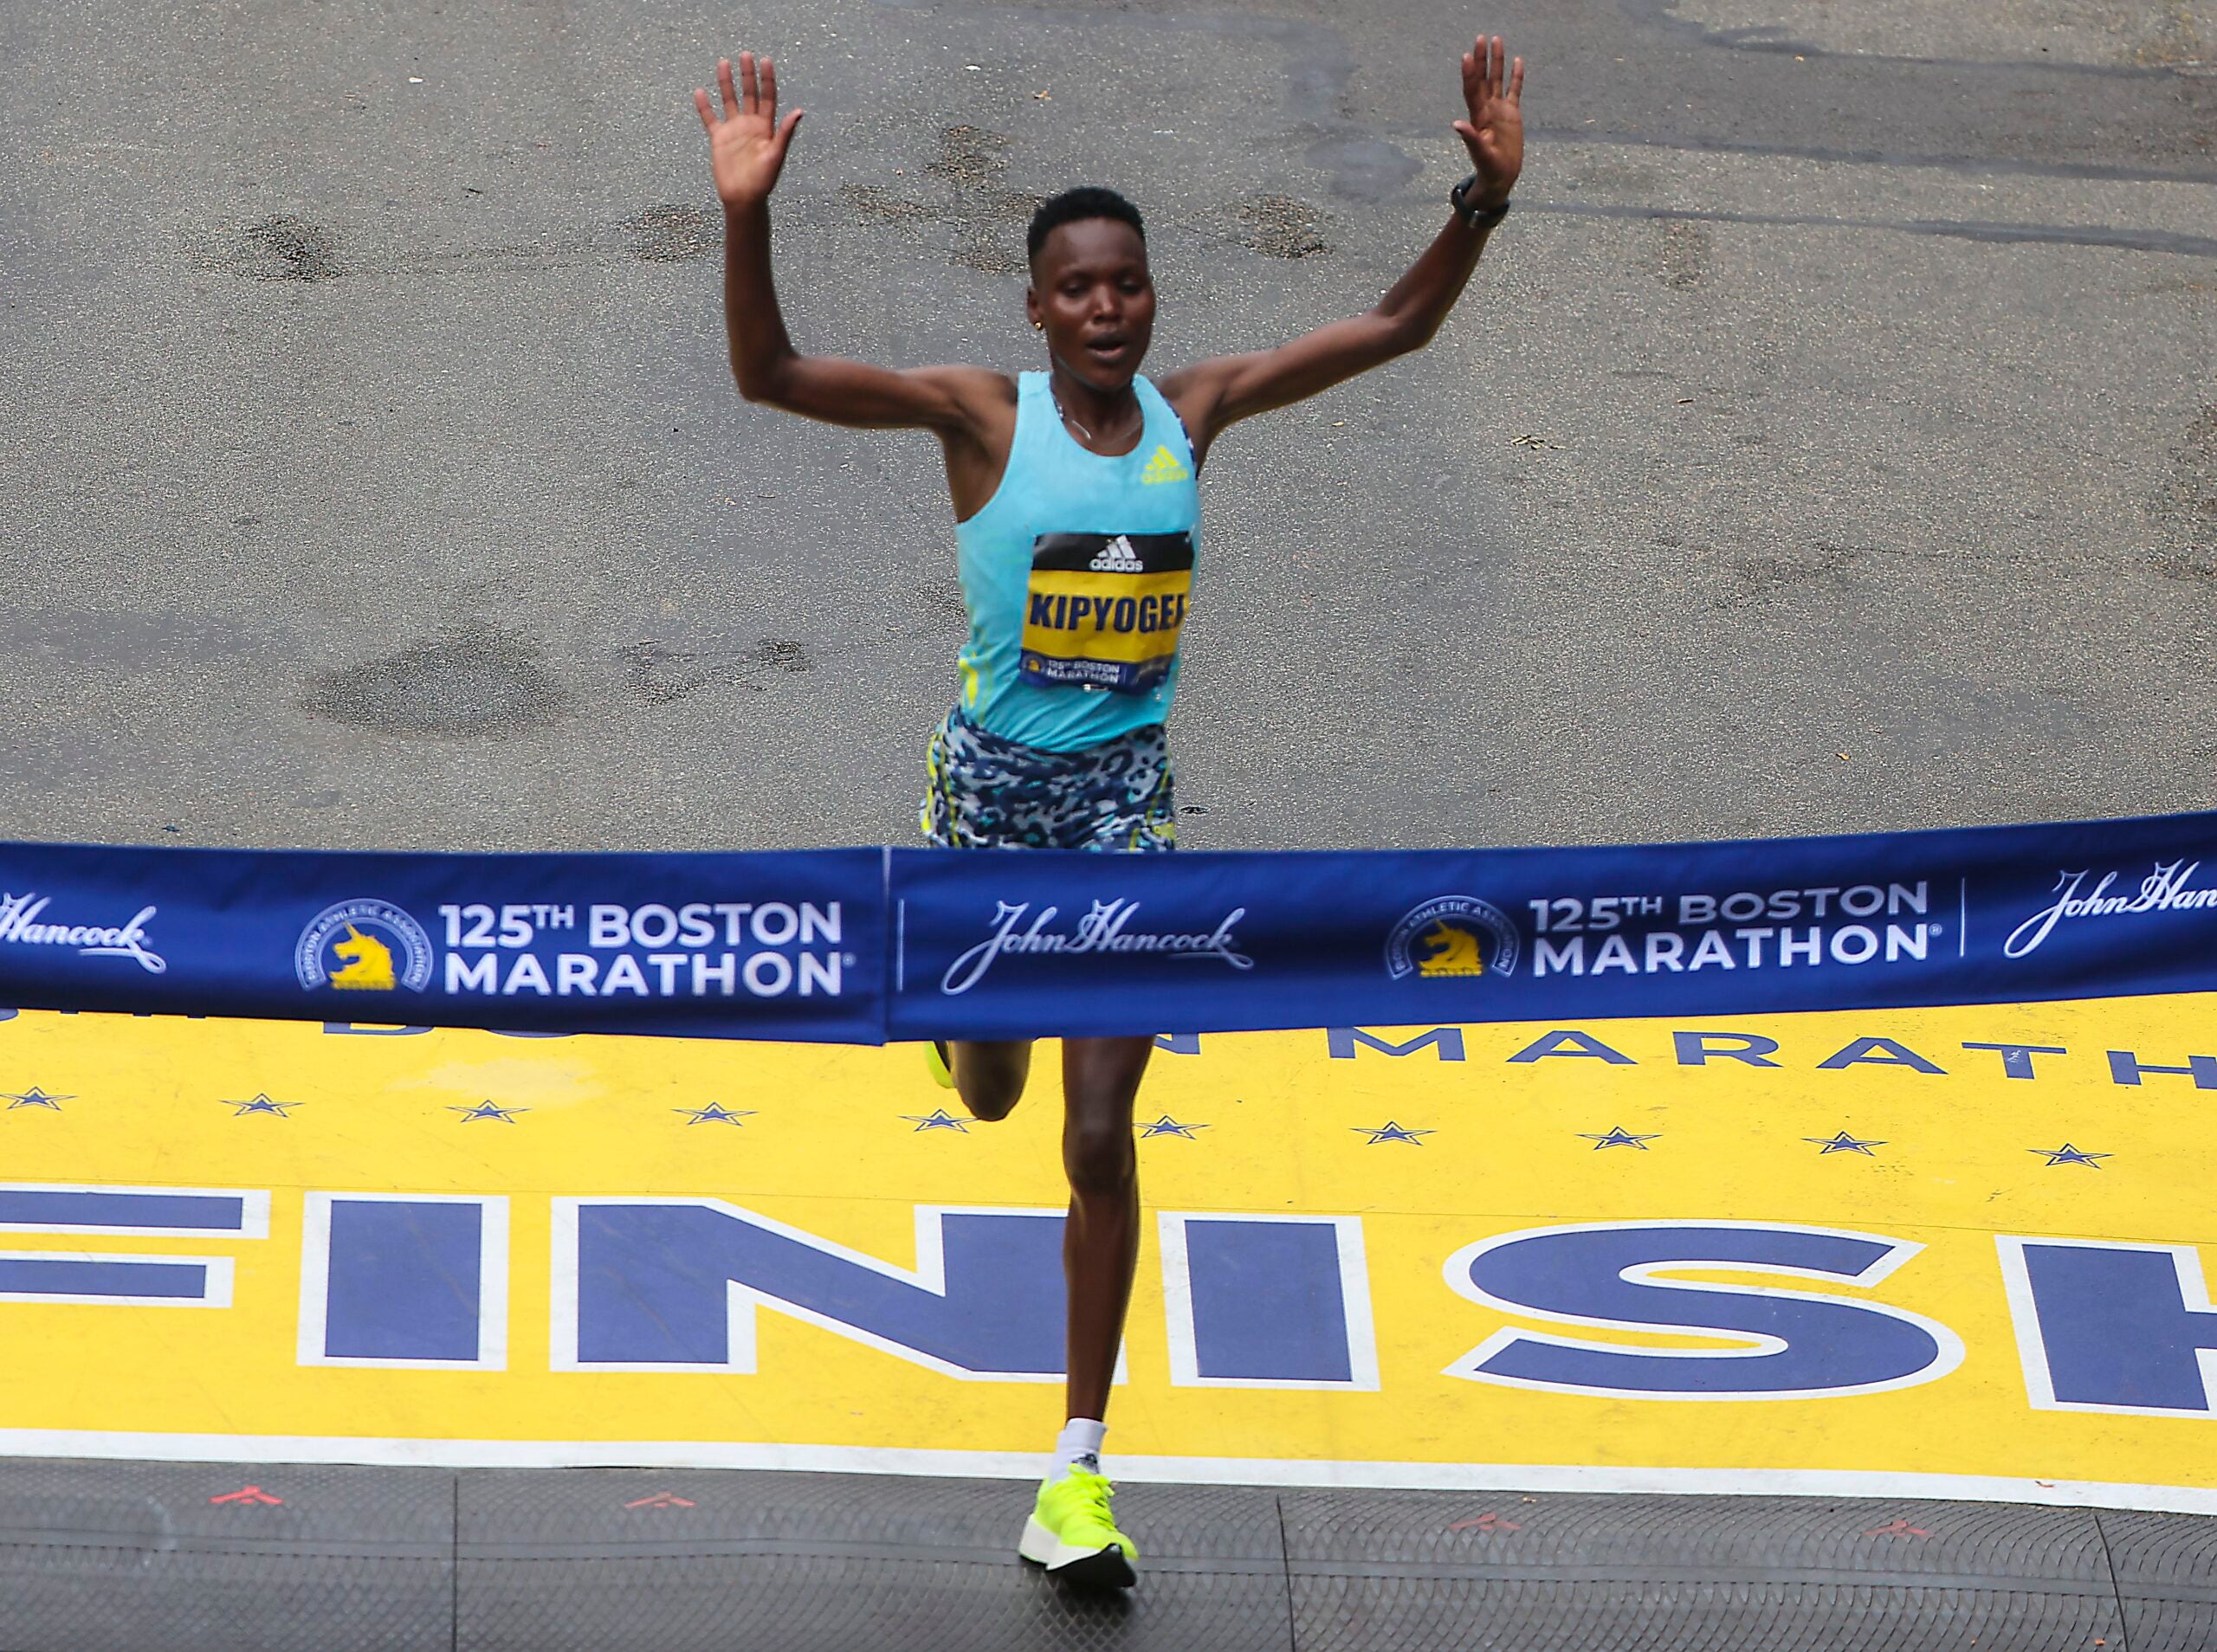 How much prize money do you get for winning the 2022 Boston Marathon